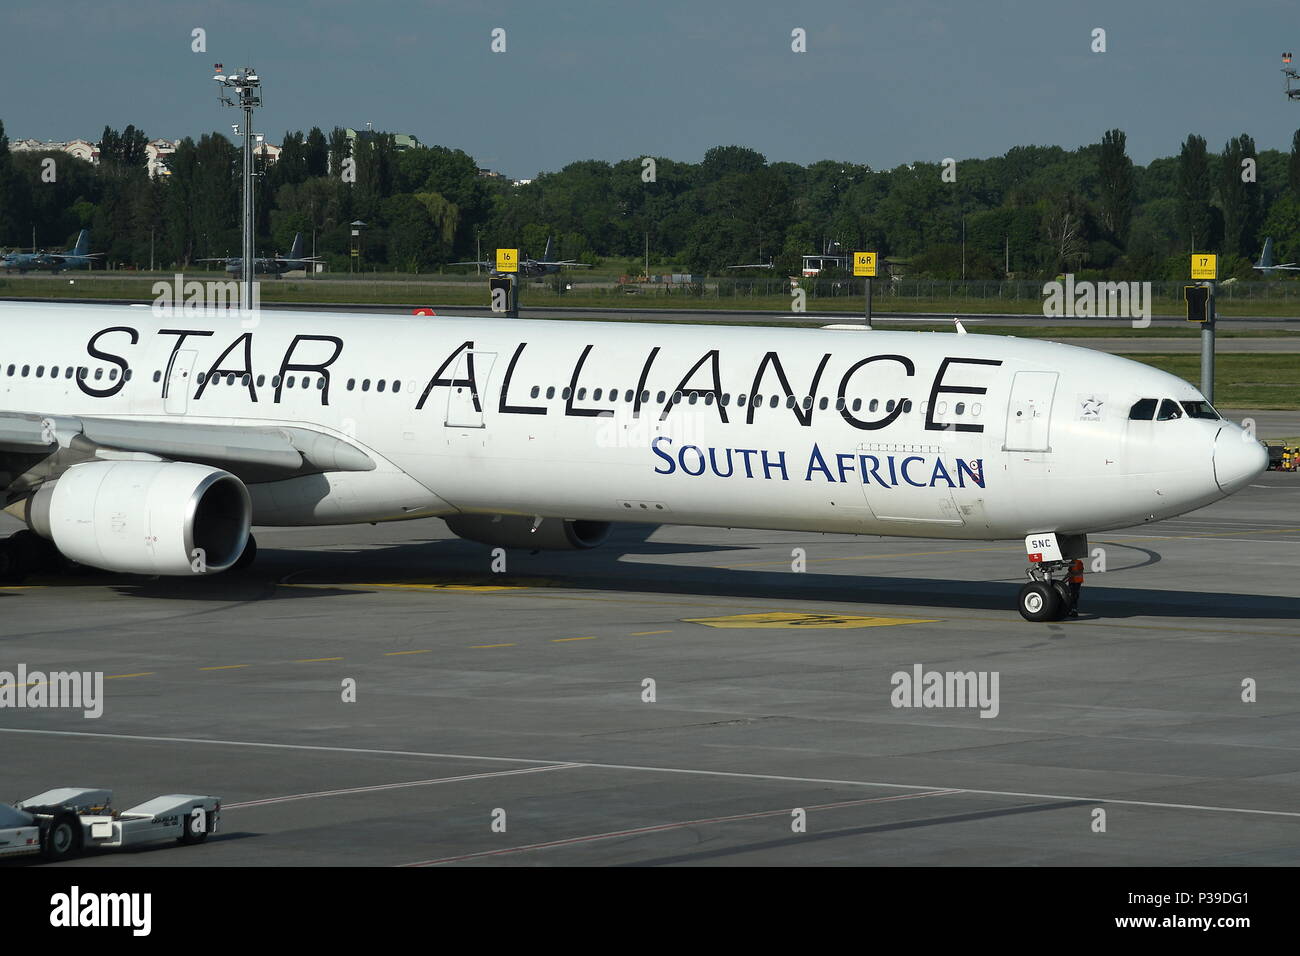 SOUTH AFRICAN AIRWAYS AIRBUS A340-600 IN STAR ALLIANCE LIVERY ...